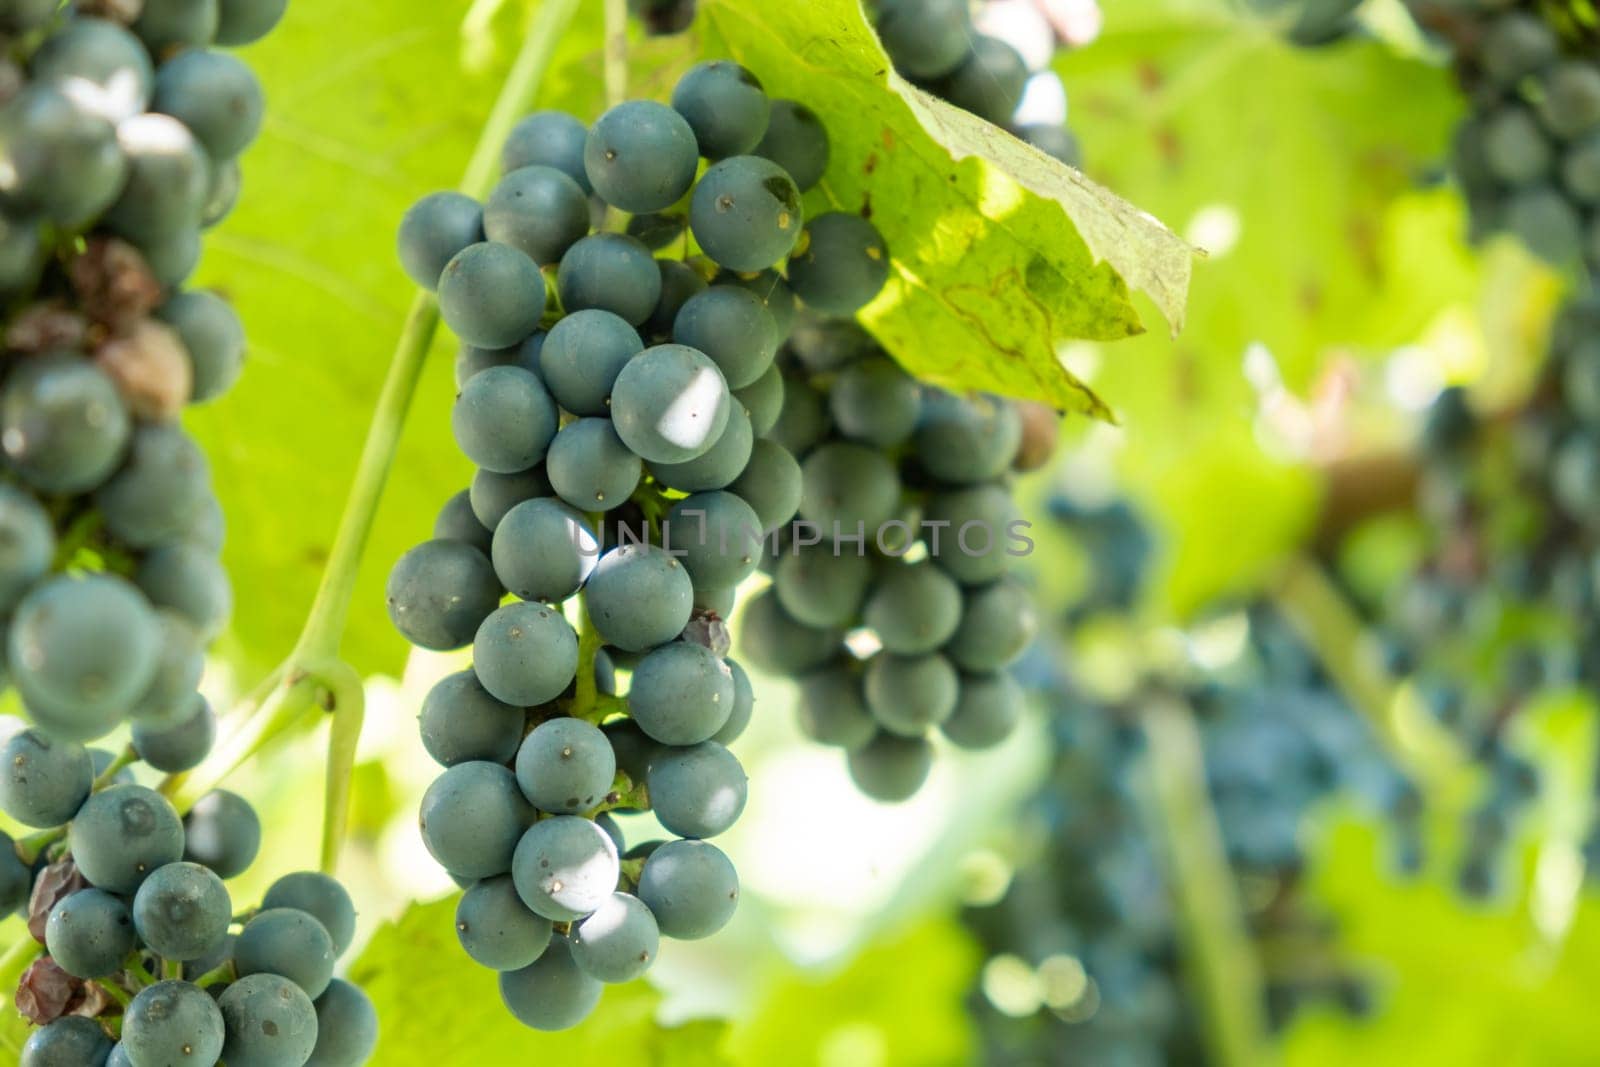 Bunches of black ripe grapes ripen on a branch before wine production in vineyard.